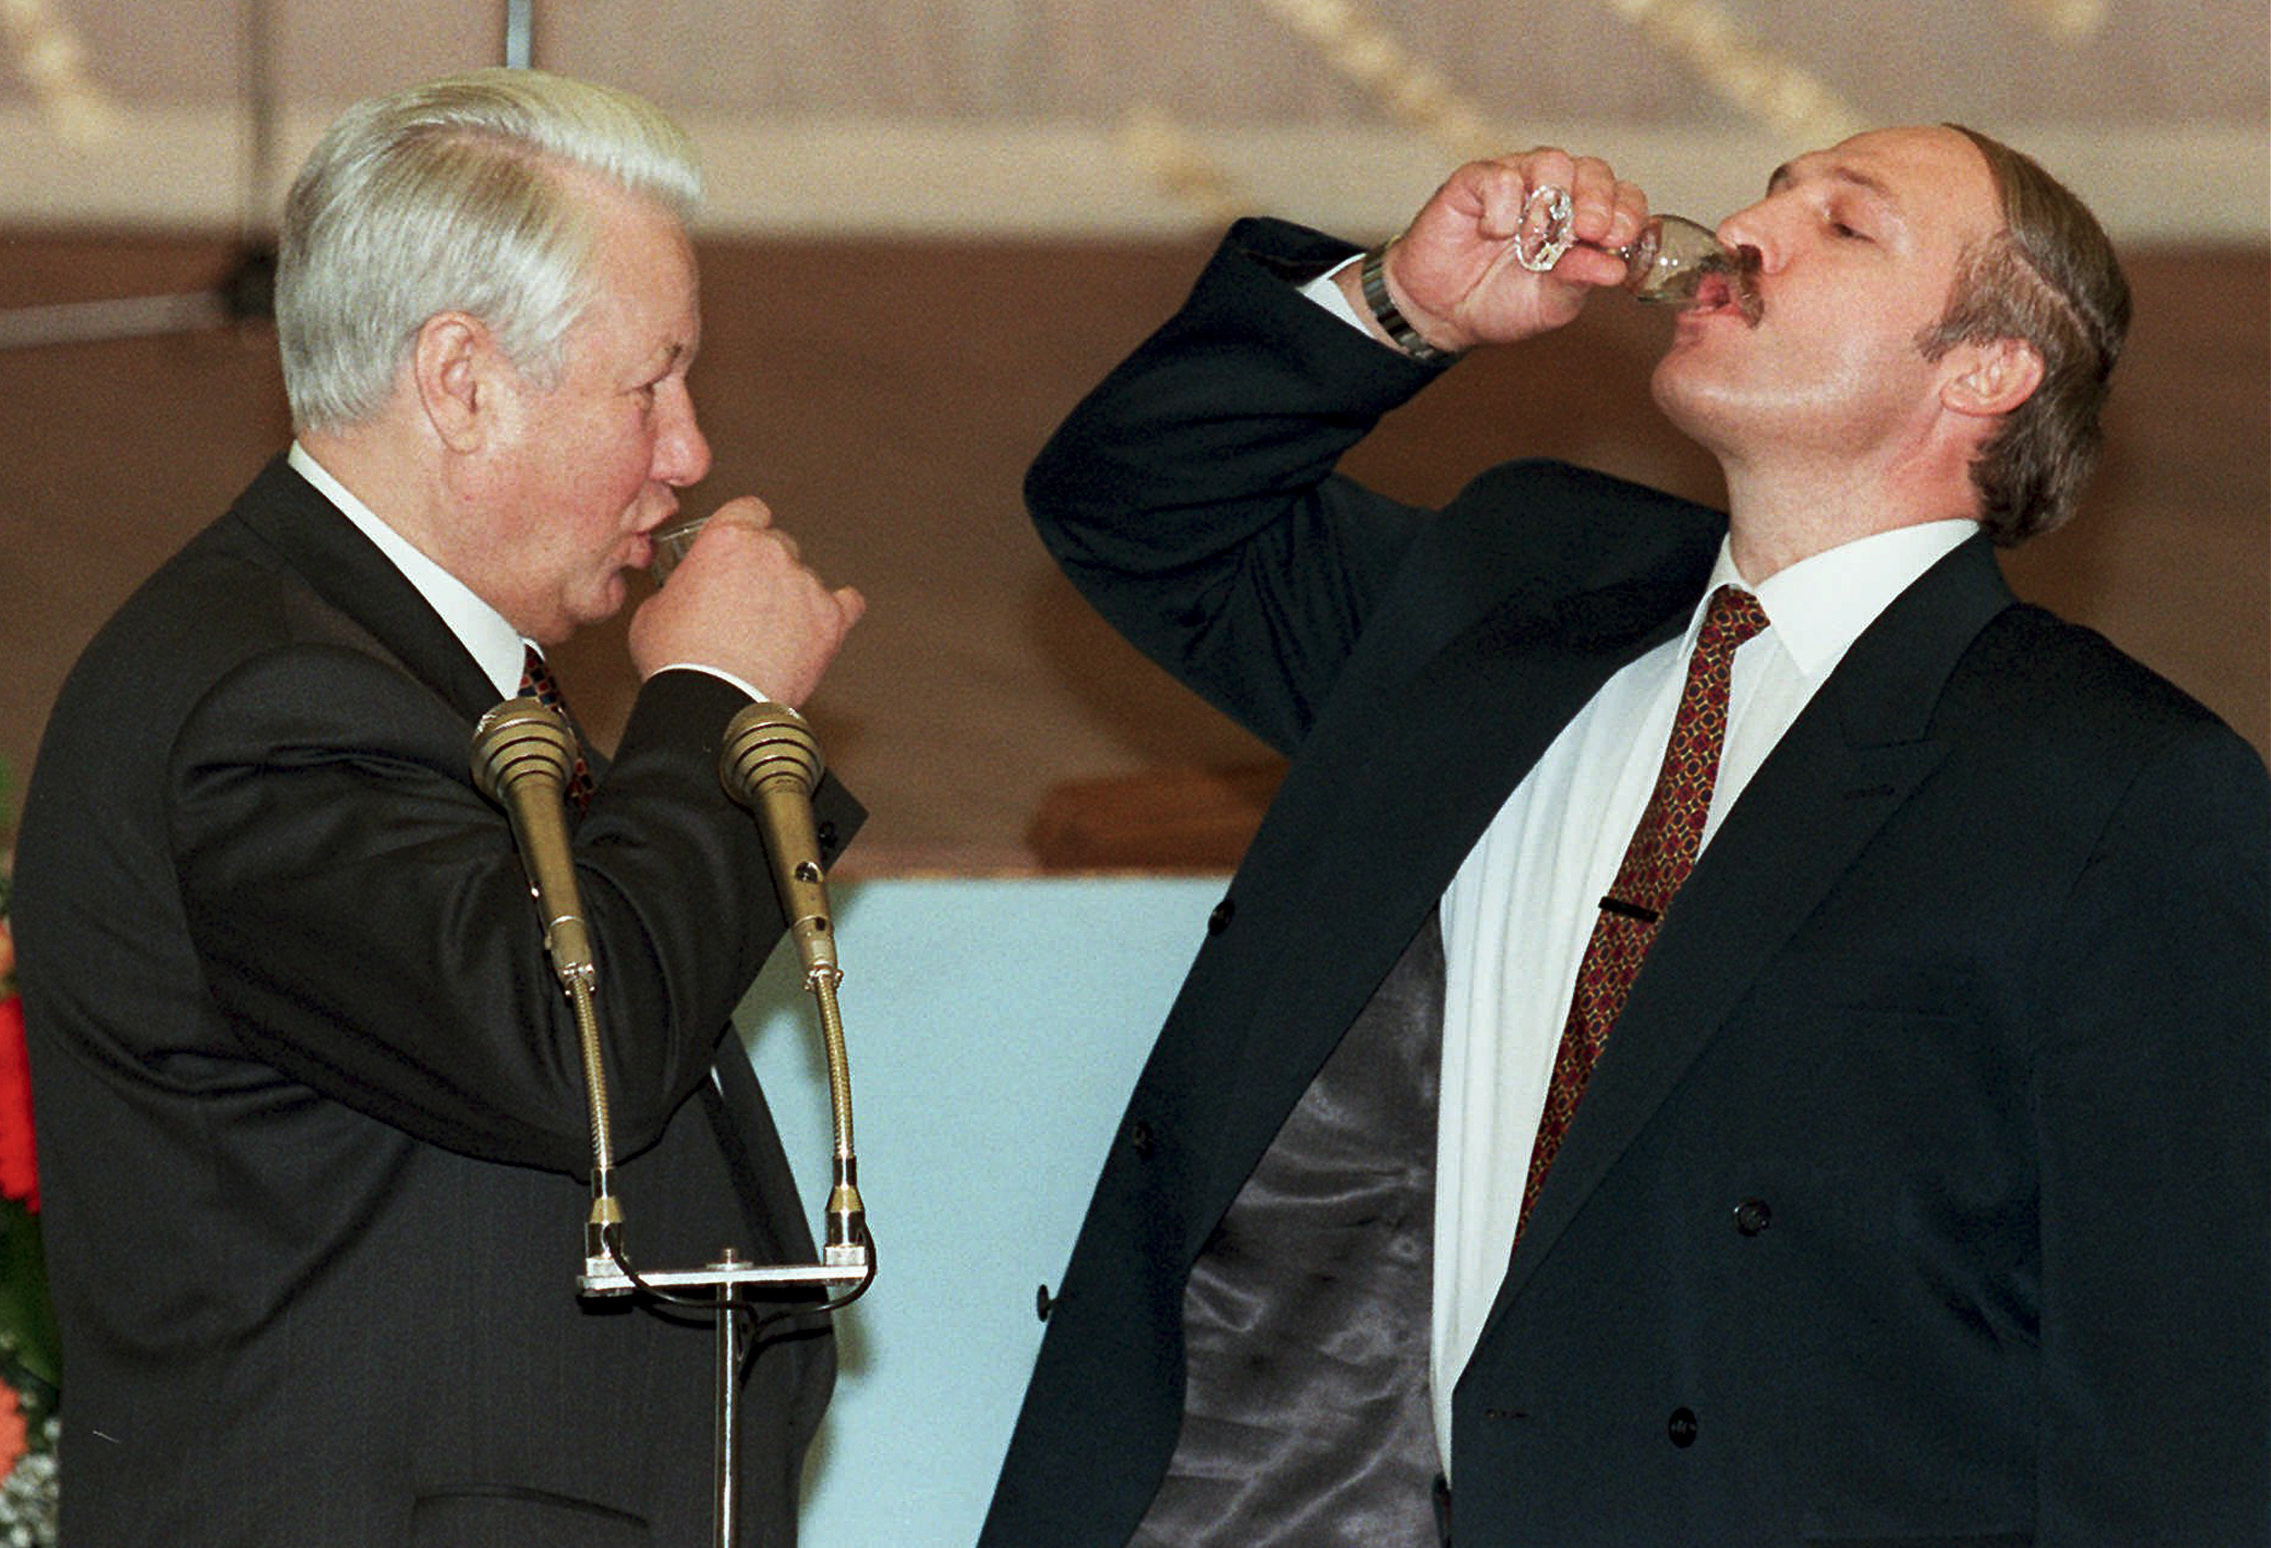 FILE -- Russian President Boris Yeltsin, left, and President Alexander Lukashenko of Belarus drink a toast celebrating the signing of an agreement in the Kremlin in Moscow, Russia, on April 2, 1996. After his first election in 1994, Lukashenko quickly bolstered ties with Russia and pushed for forming a new union state in the apparent hope of becoming its head after a full merger — an ambition dashed by the 2000 election of Vladimir Putin to succeed the ailing Yeltsin. (Pool Photo via AP, File)